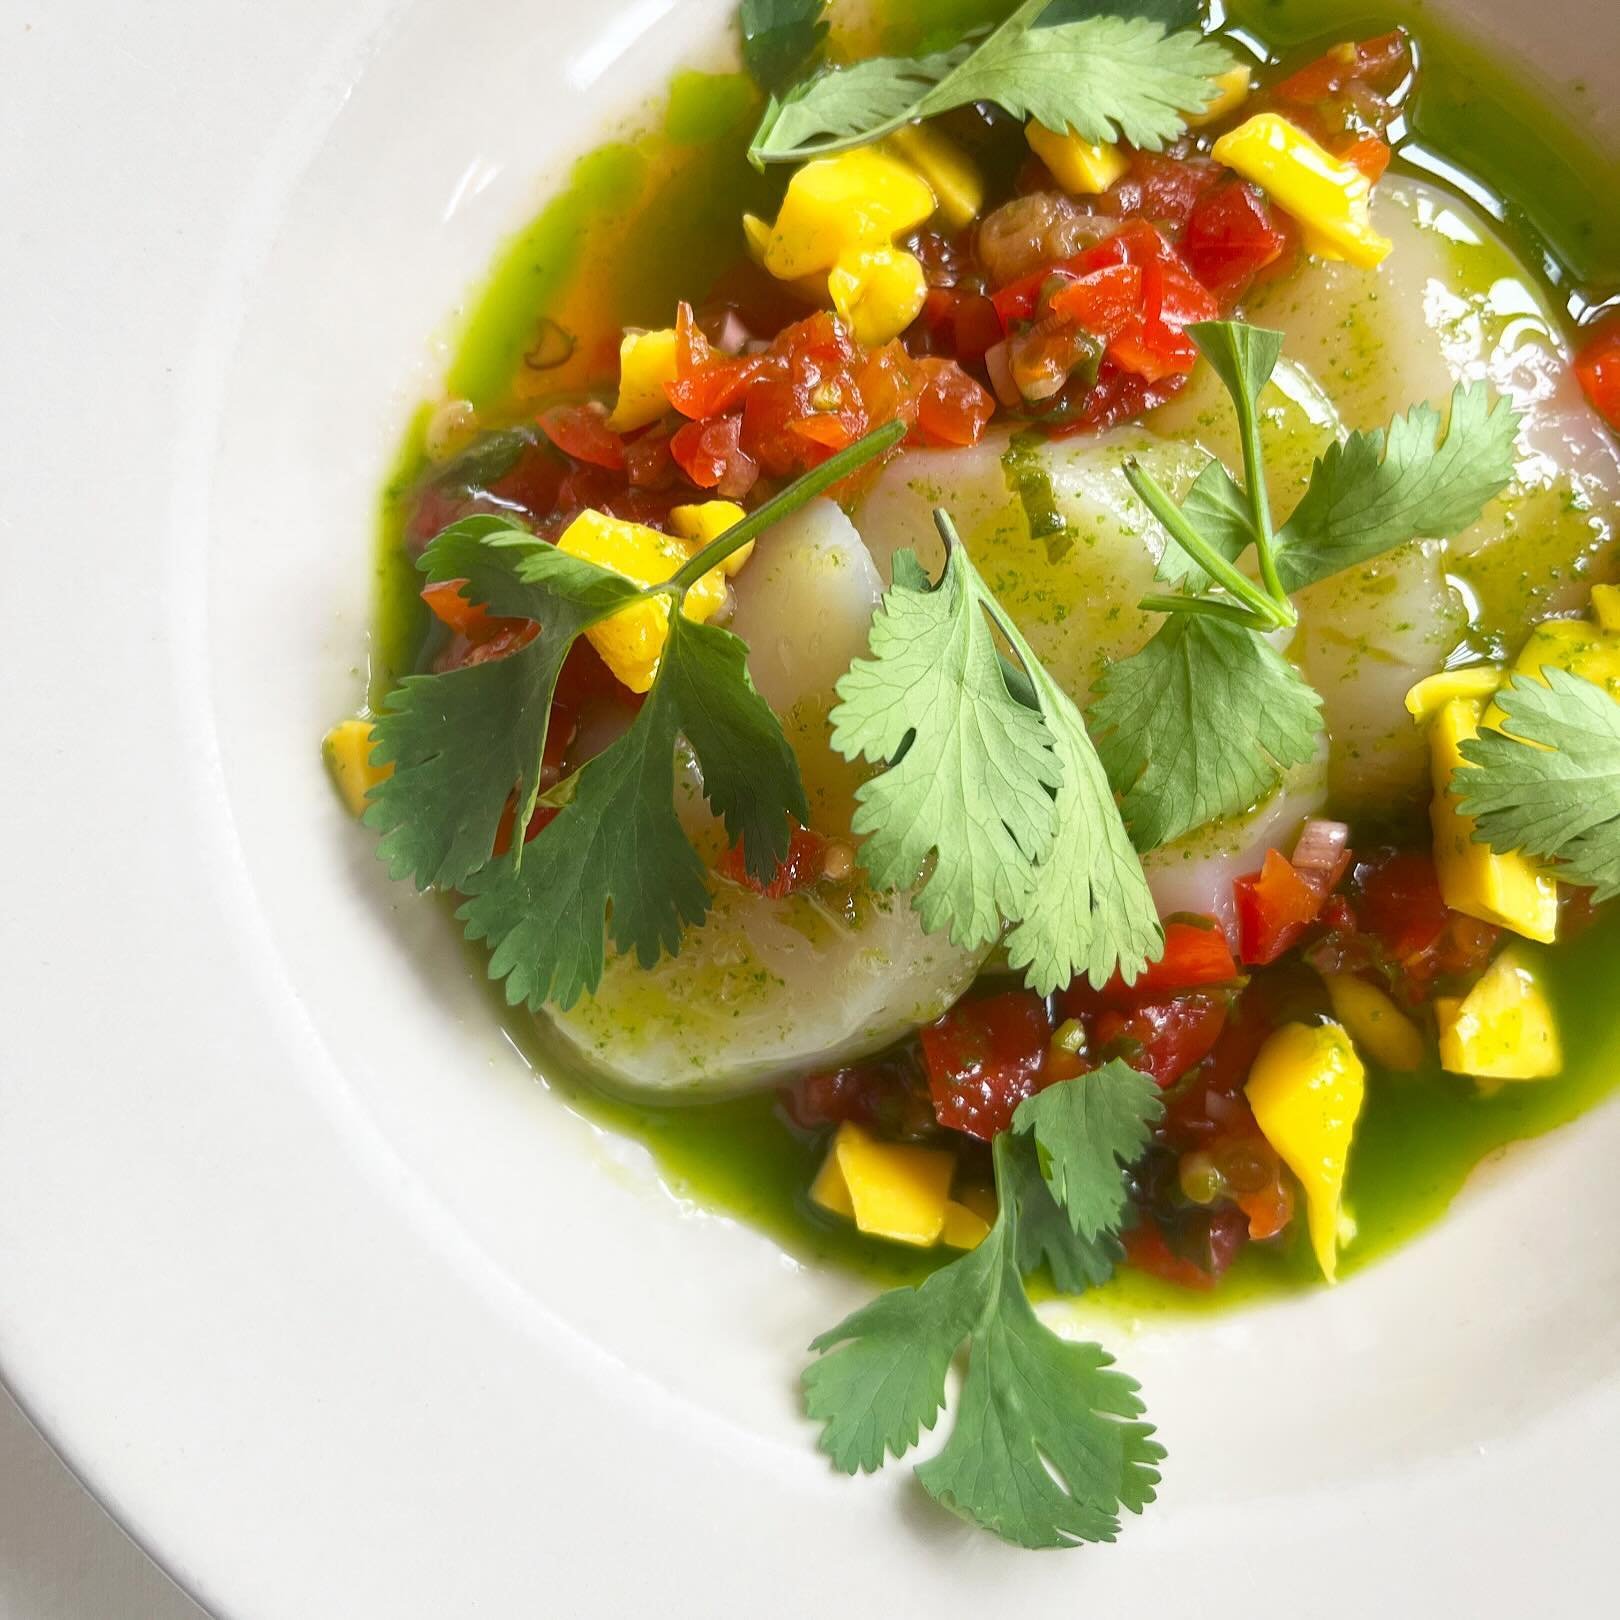 Raw scallops in cilantro oil wearing red pepper and mango jewelry! New to the menu 🥭